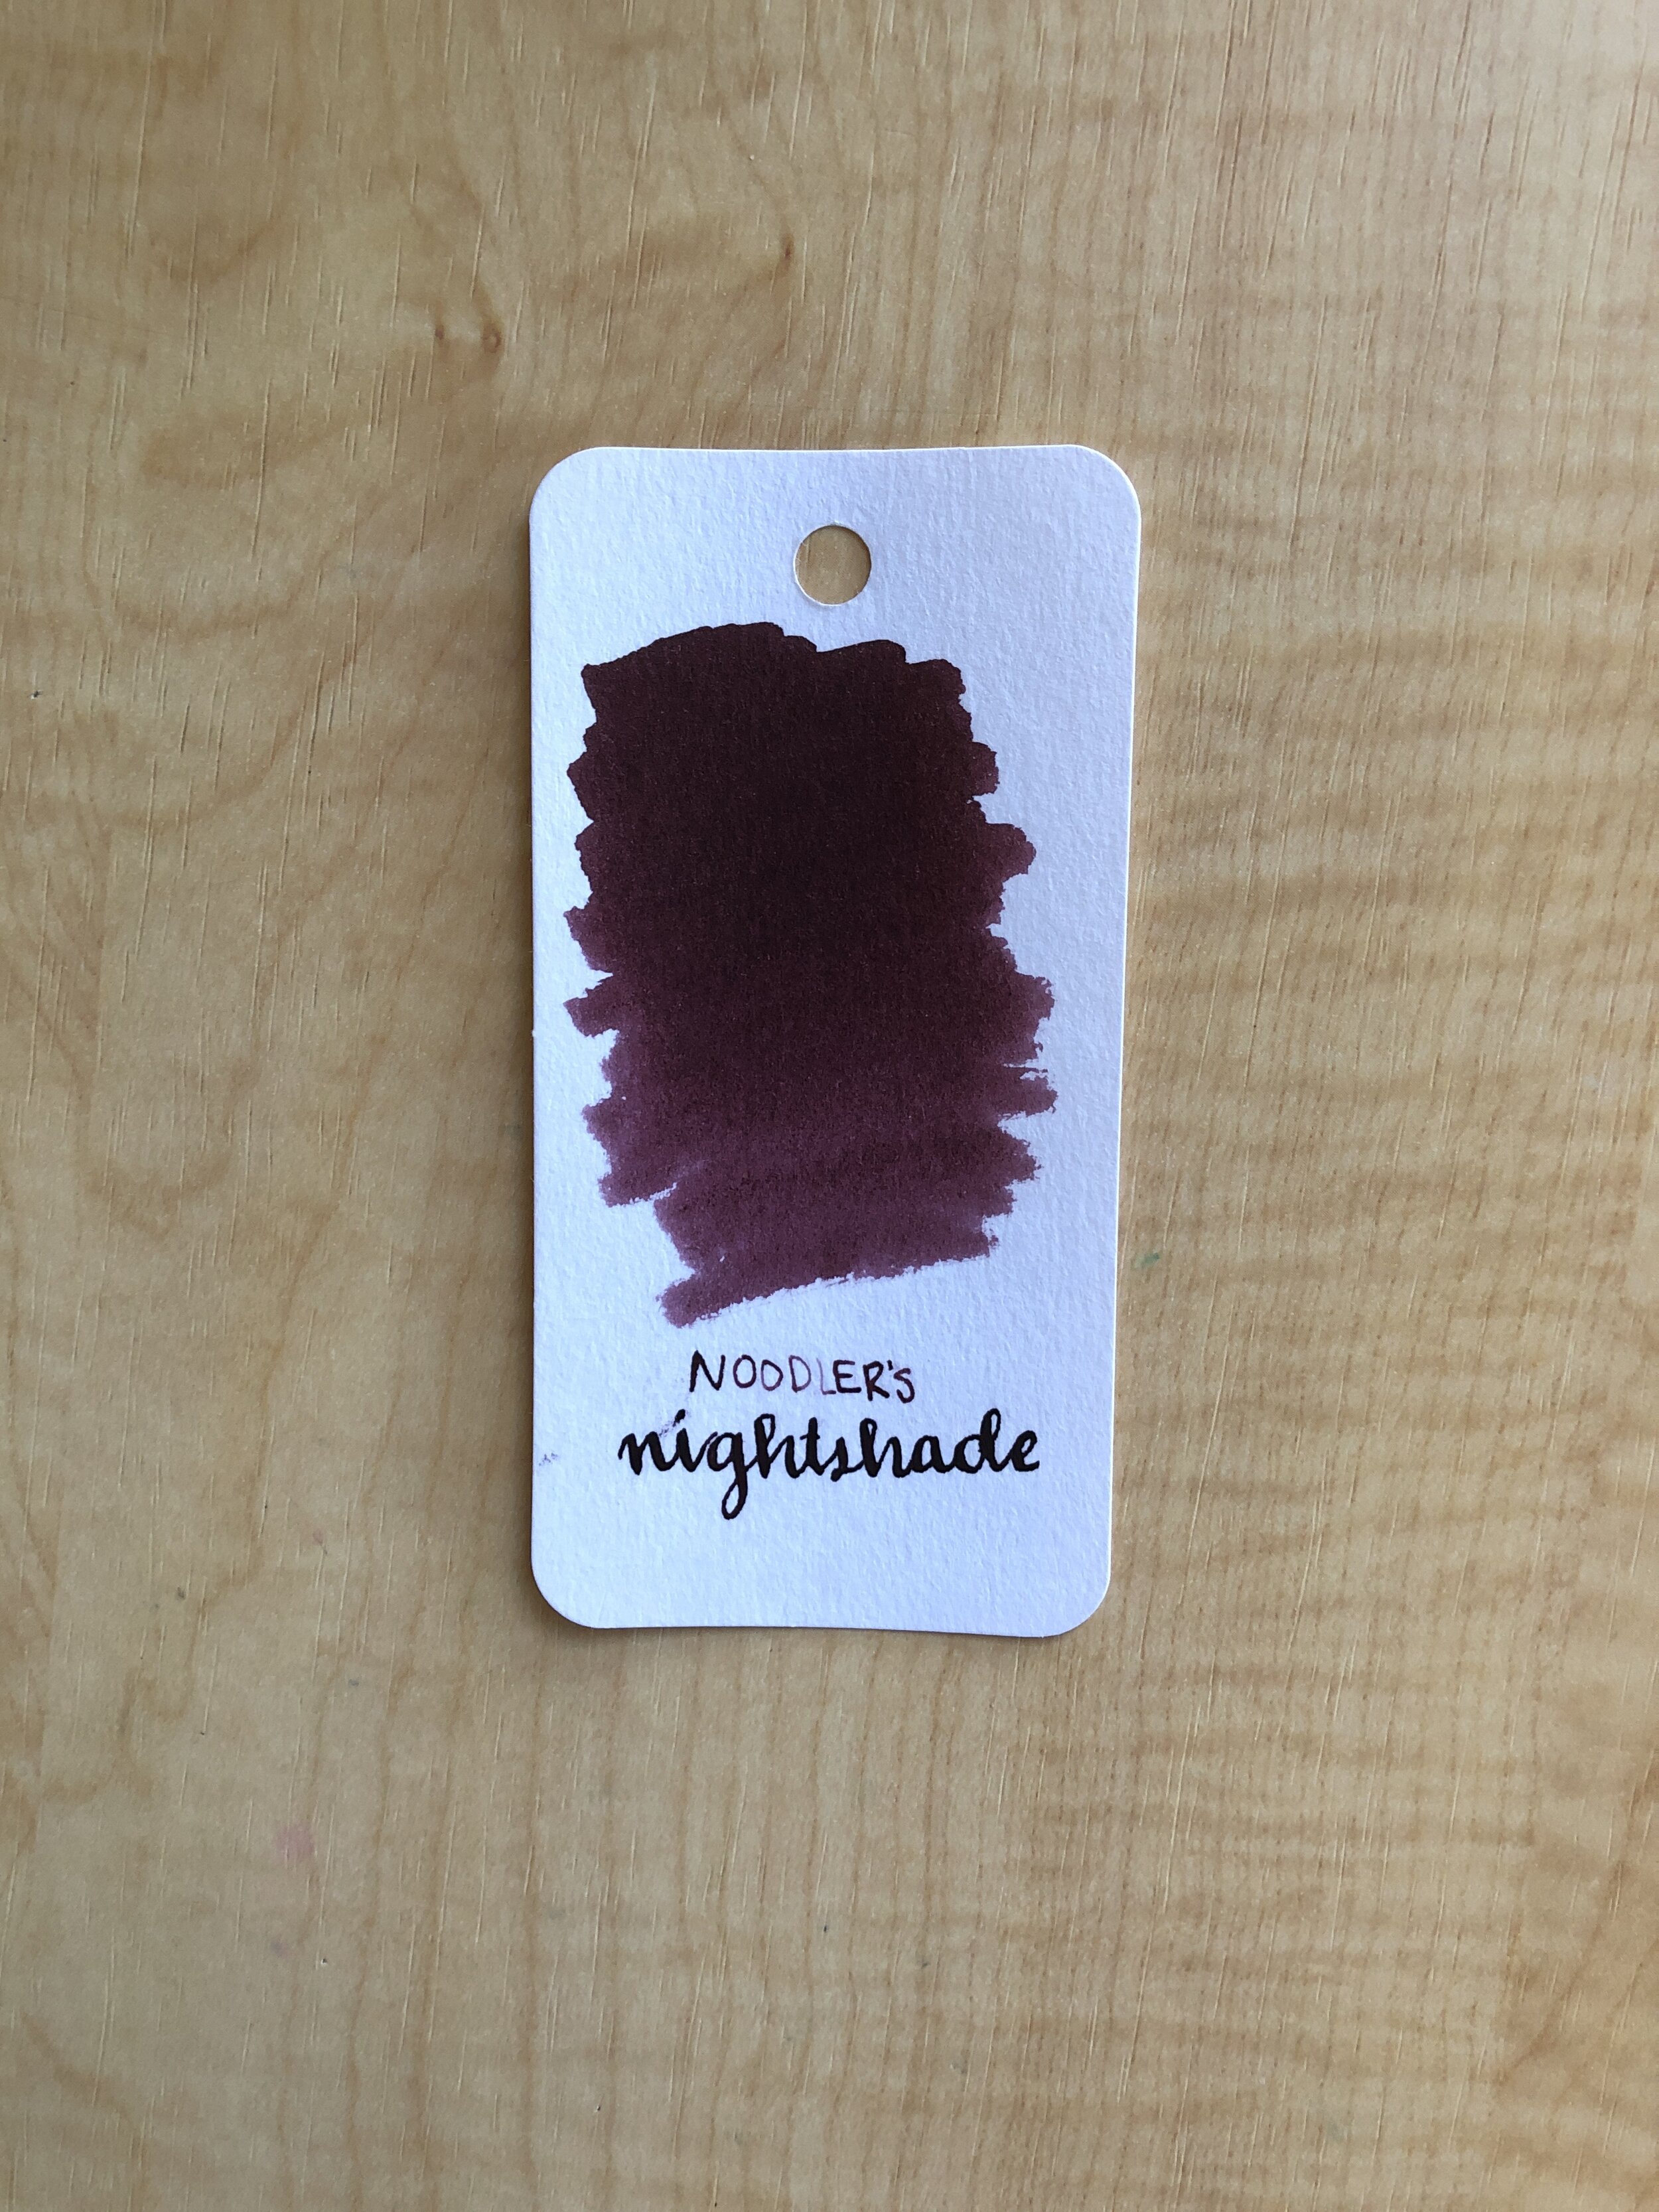 Ink Review #49: Noodler's Nightshade — Fountain Pen Pharmacist